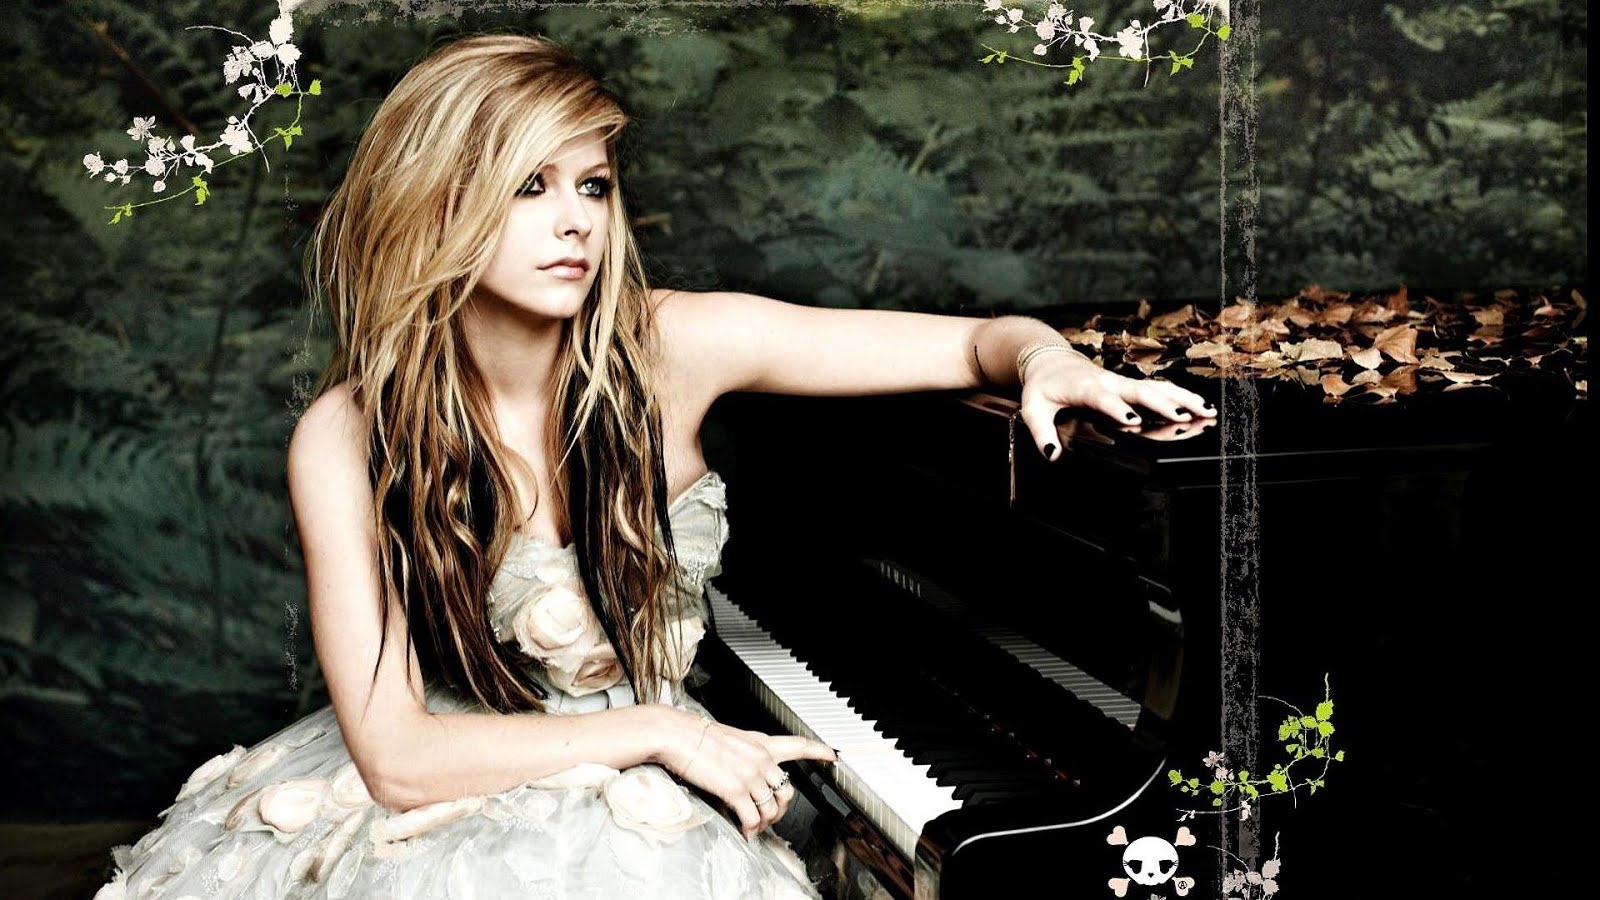 One of My Favorite Singers - Avril Lavigne